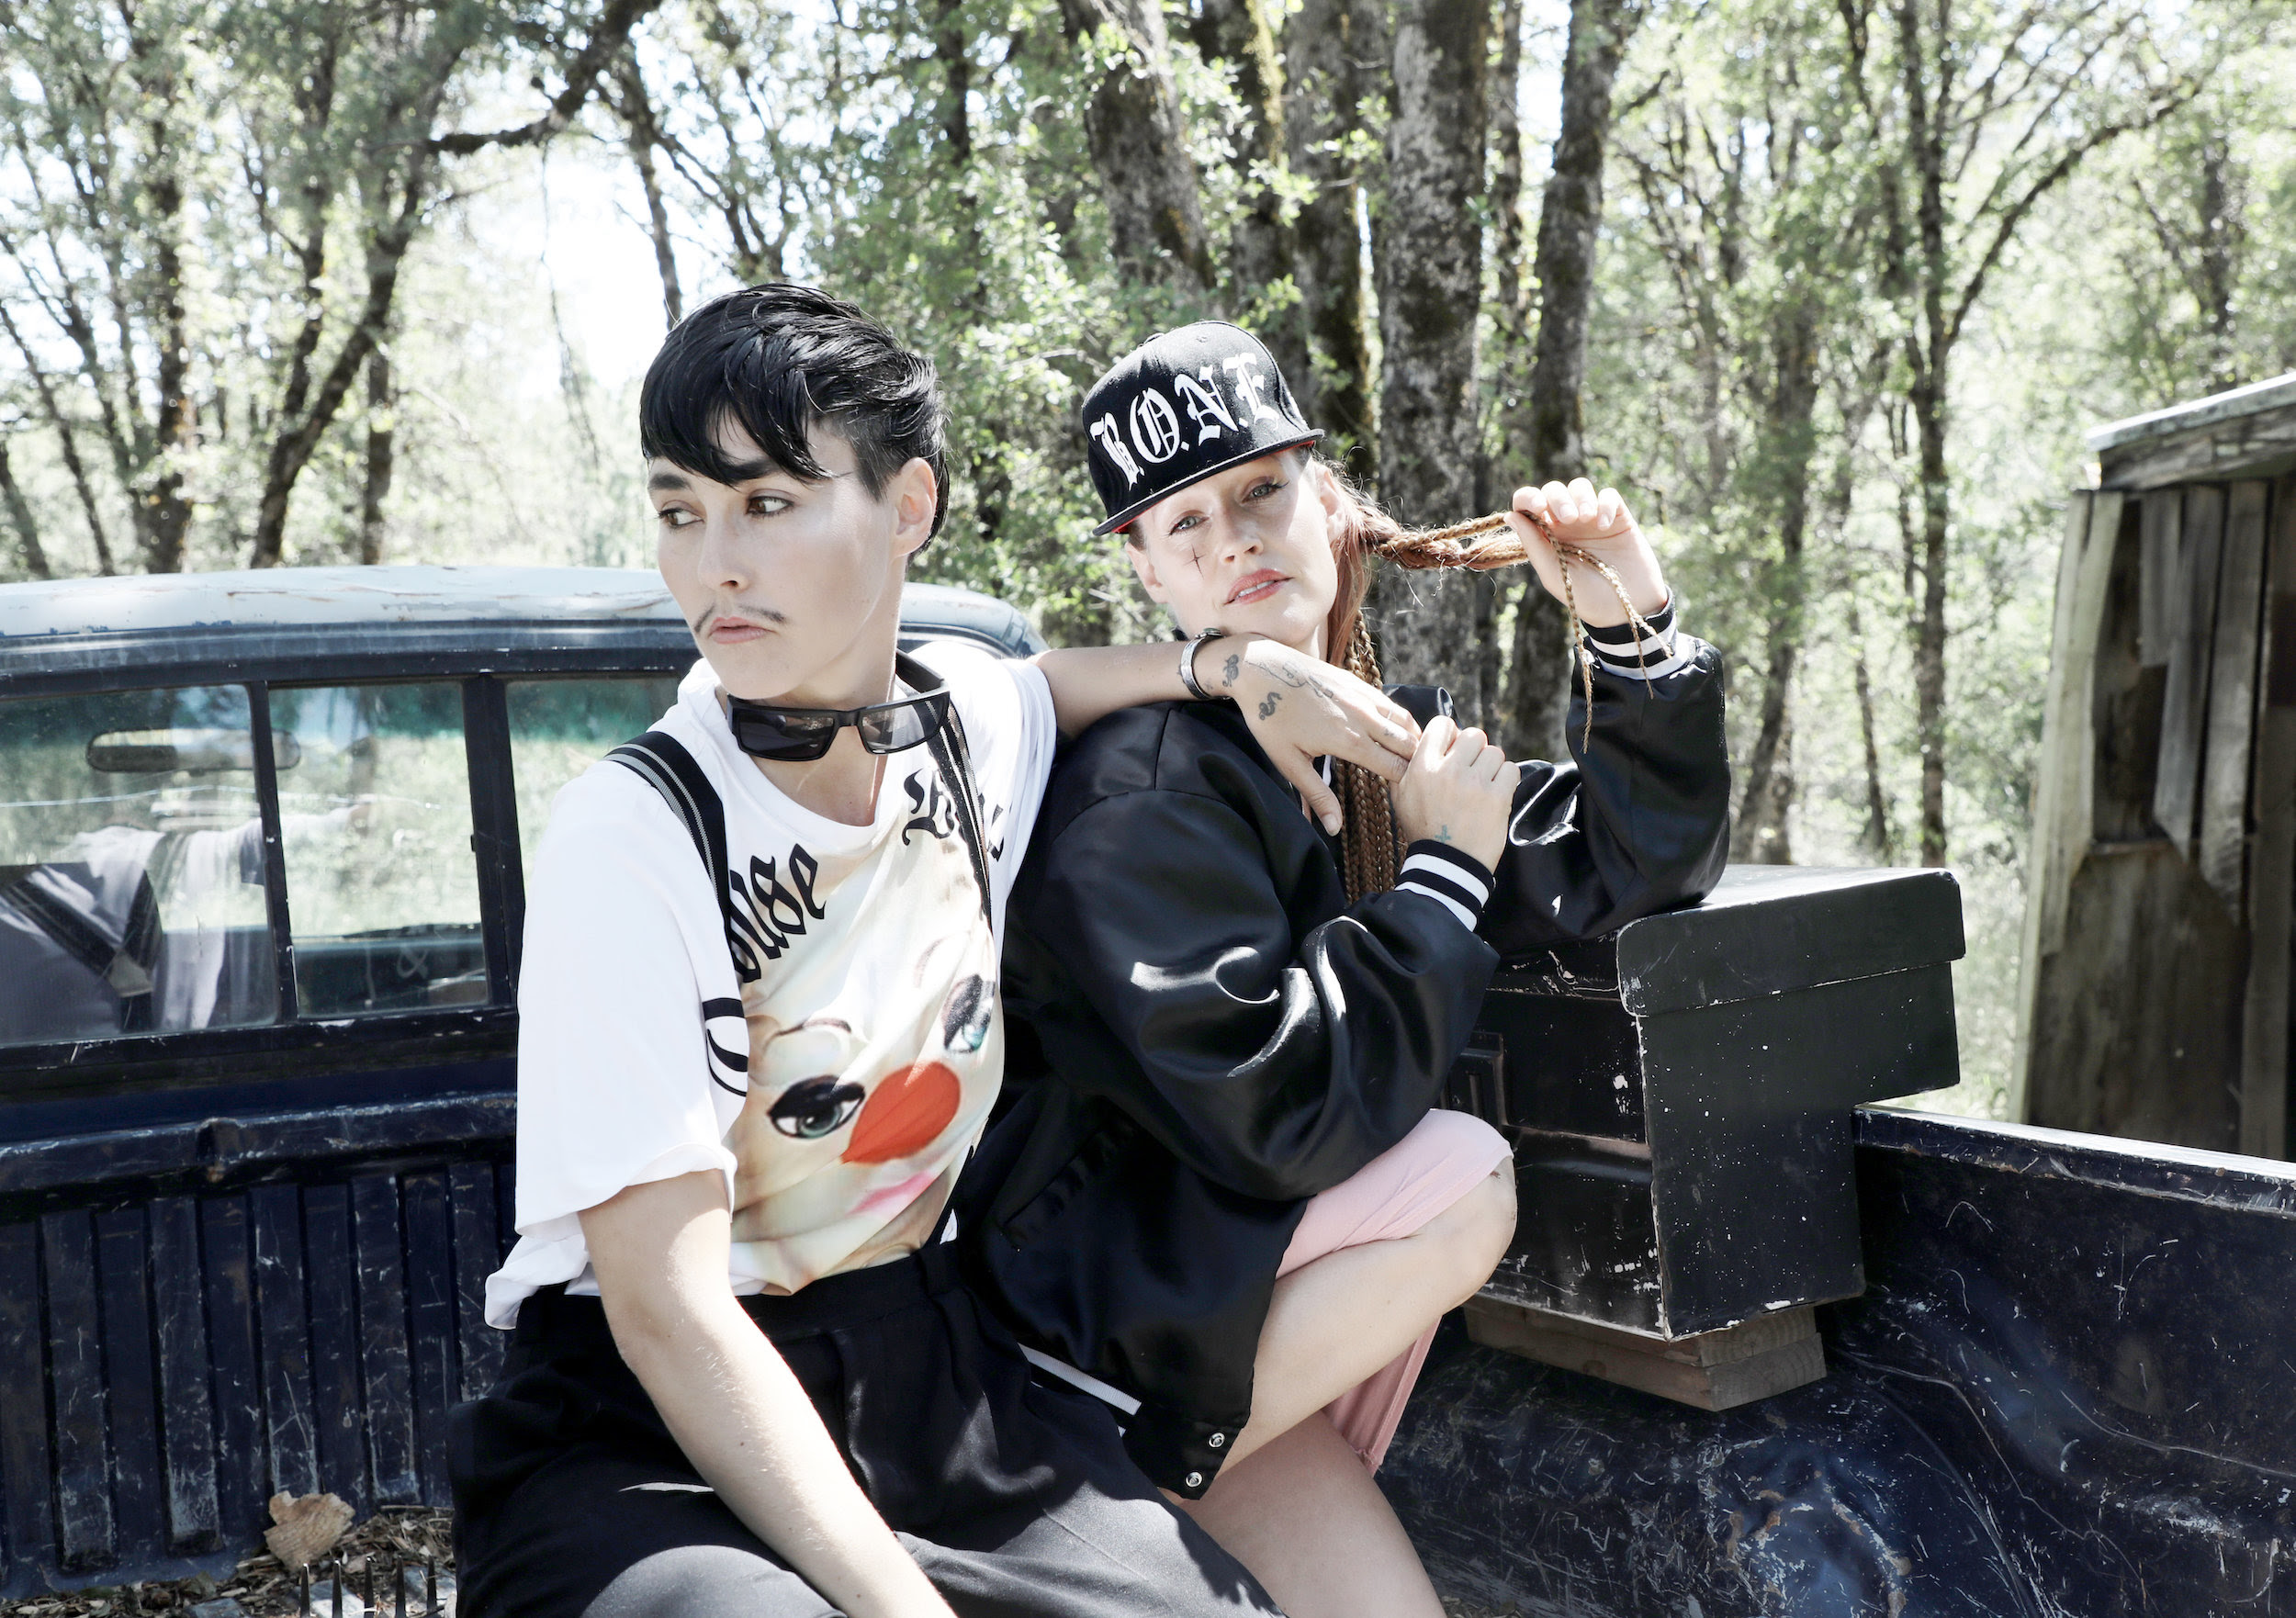 CocoRosie, have released a new collaboration with Chance The Rapper. The track “Roo”